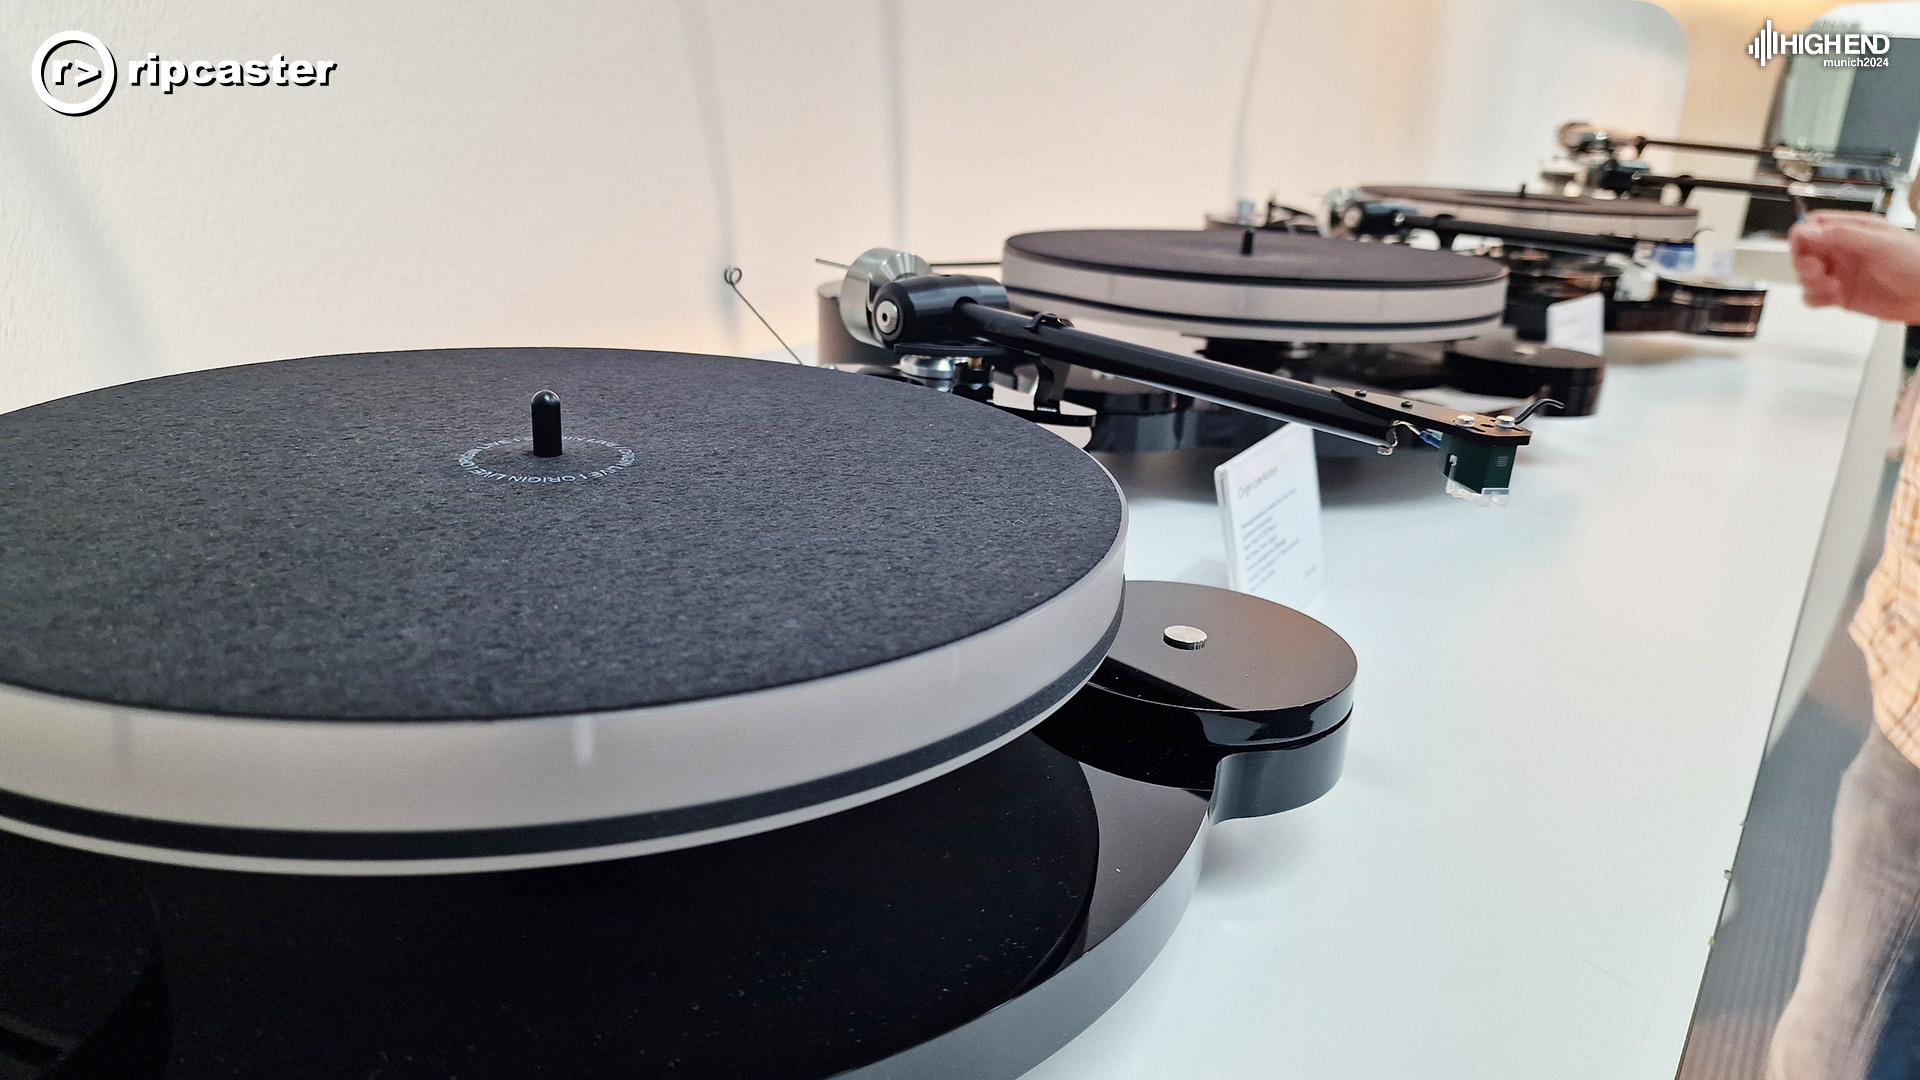 A variety of turntables lined up on a long side unit